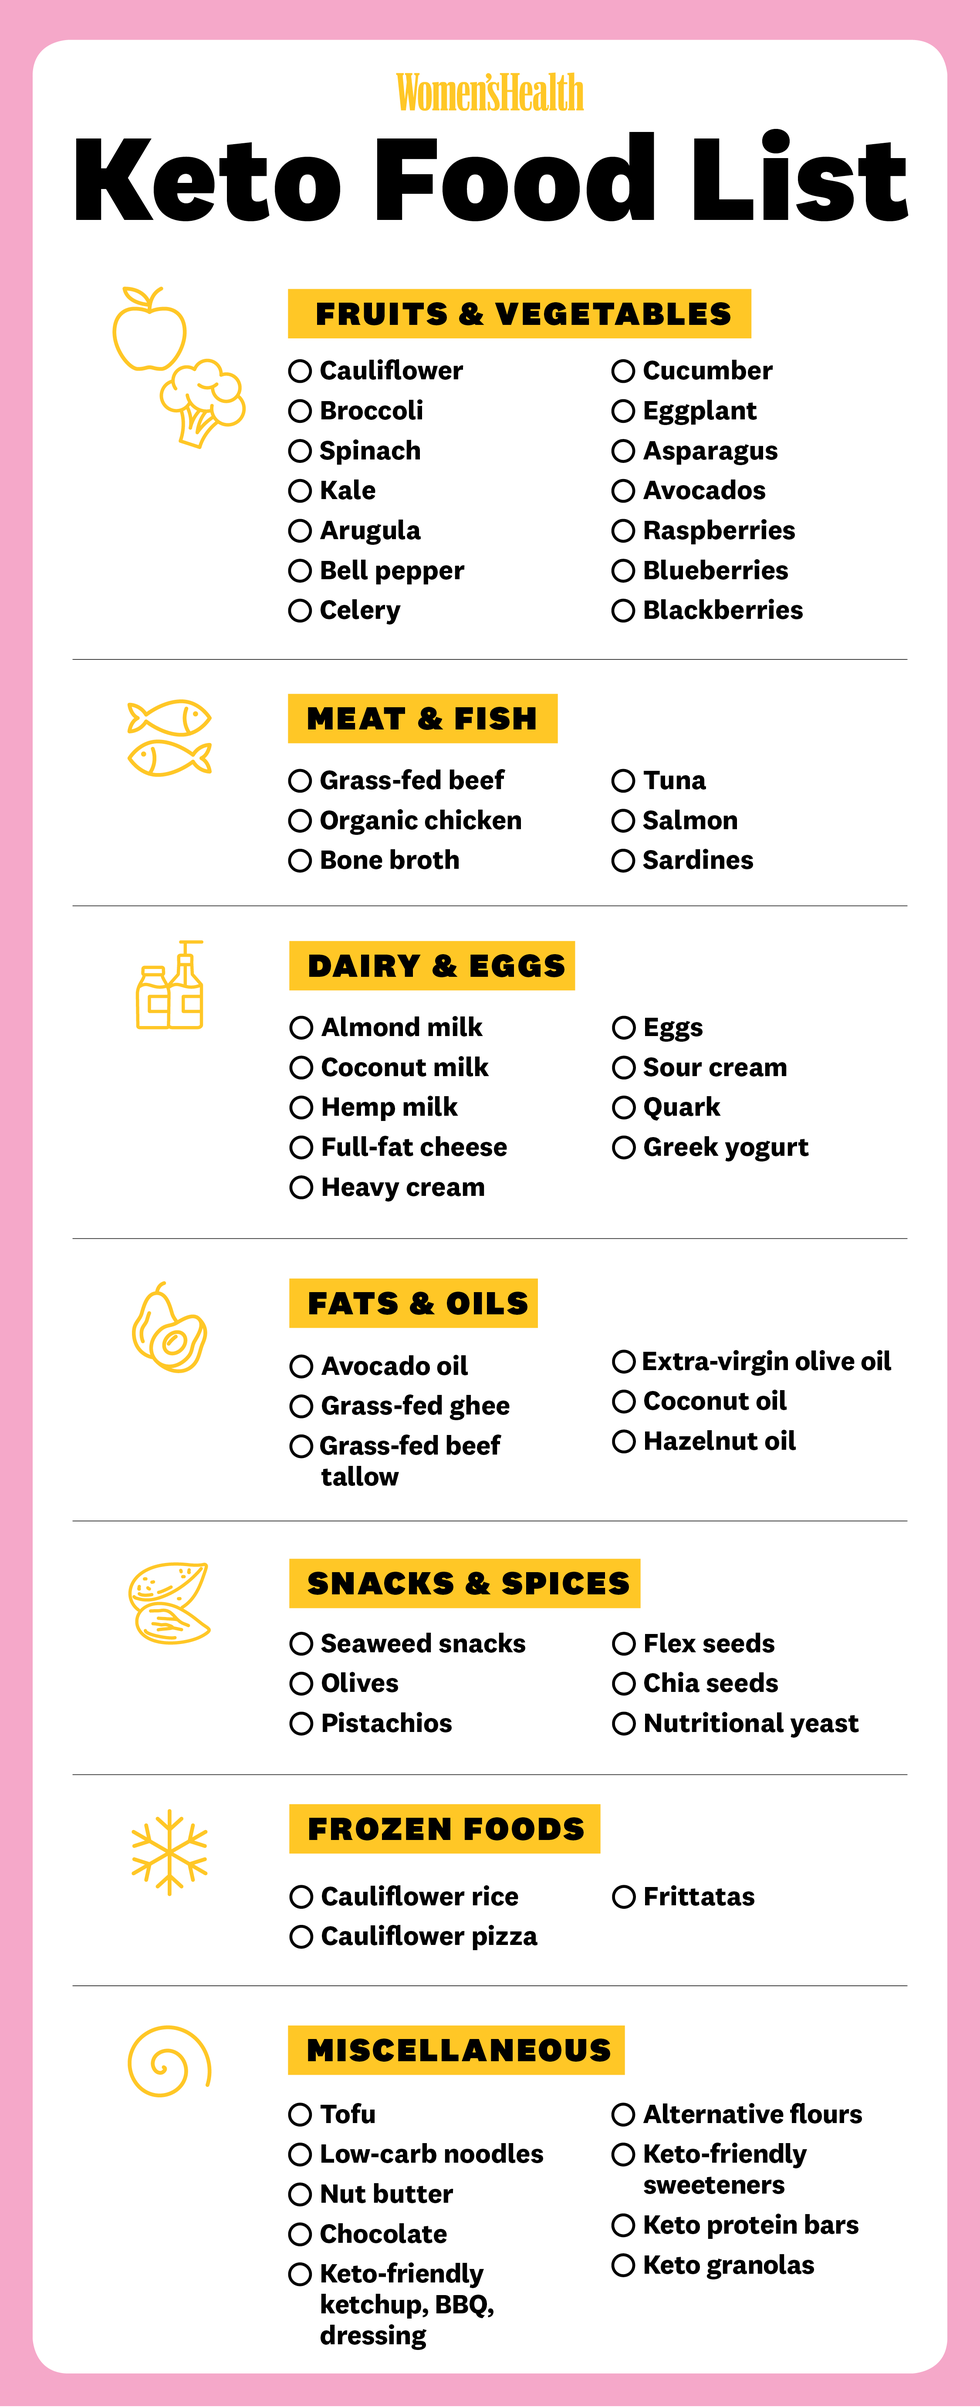 https://hips.hearstapps.com/hmg-prod/images/infographic-102020-ketoinfographic-1603221737.png?resize=980:*